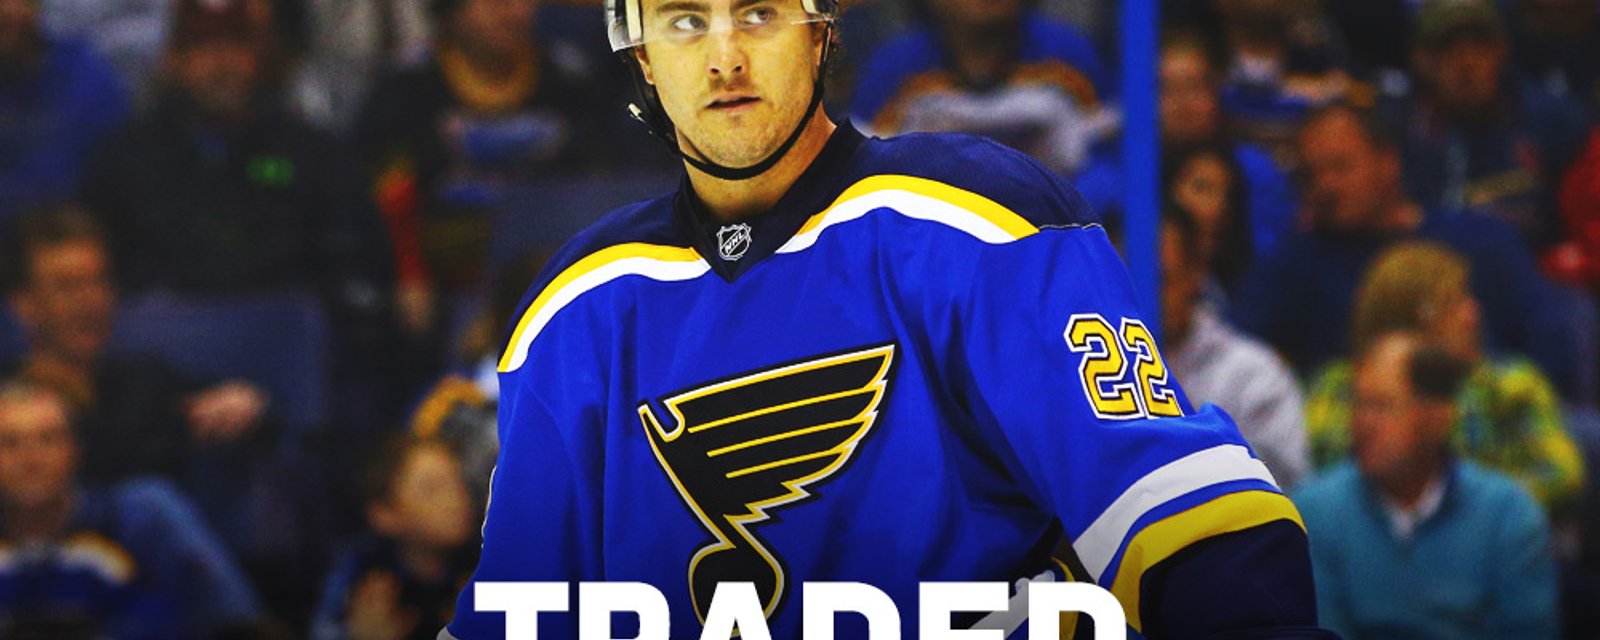 Breaking: Early reports suggest Kevin Shattenkirk has been traded.